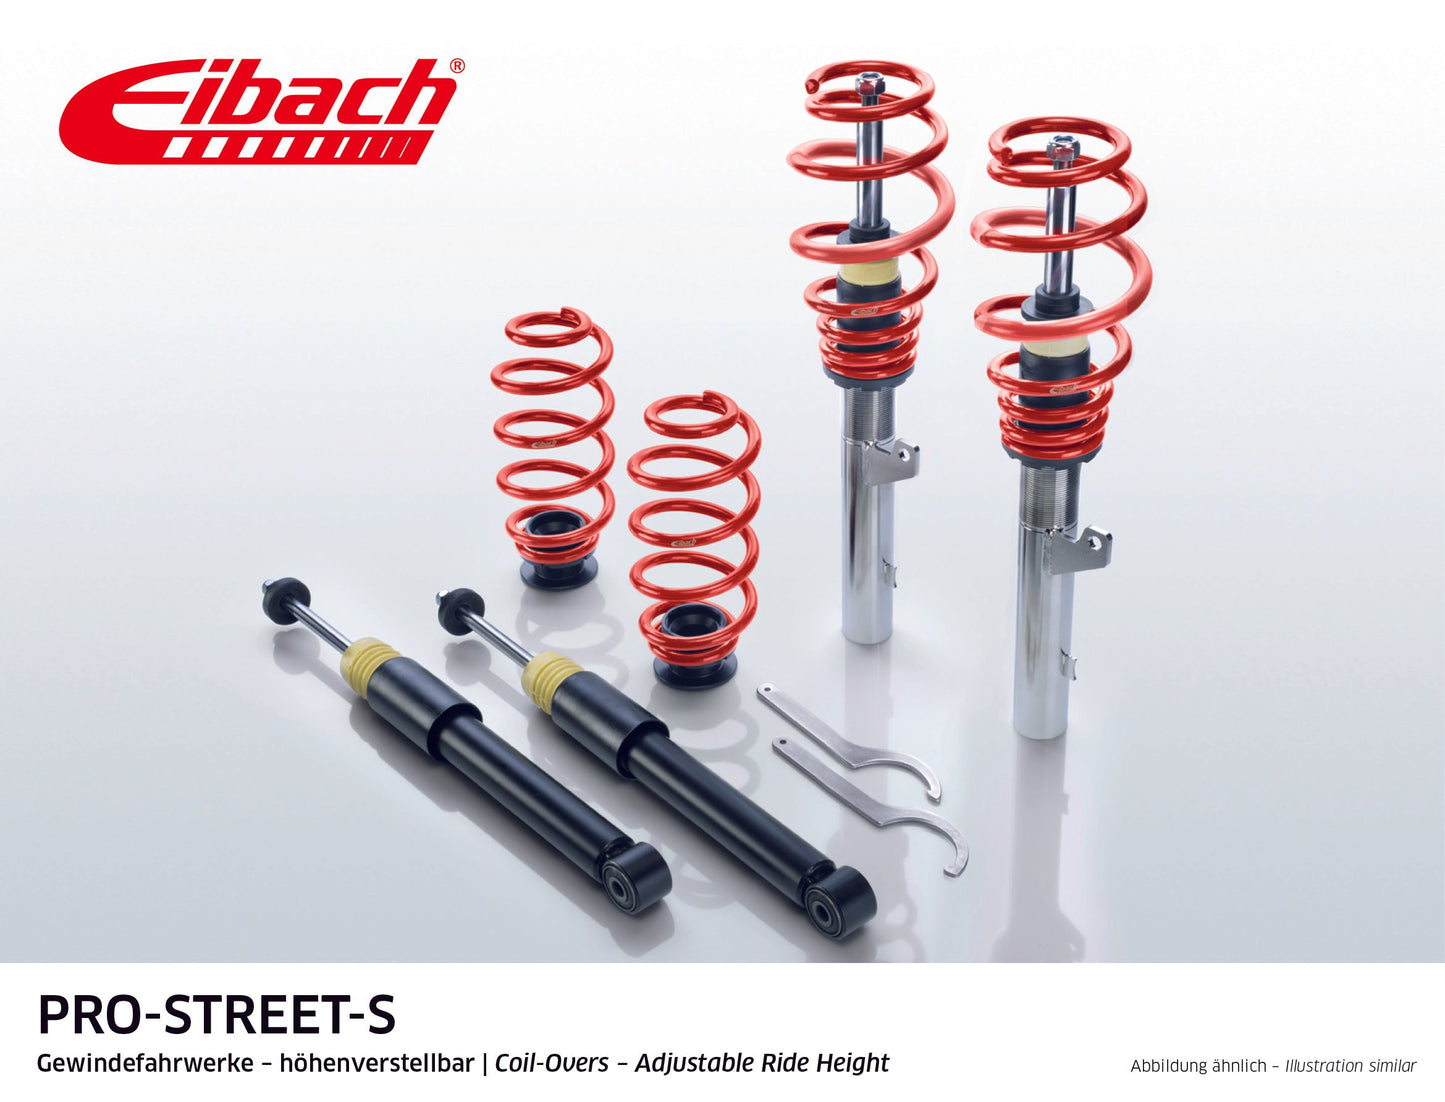 Eibach Pro-Street Coilover (PSS65-25-036-01-22) at £1203.16